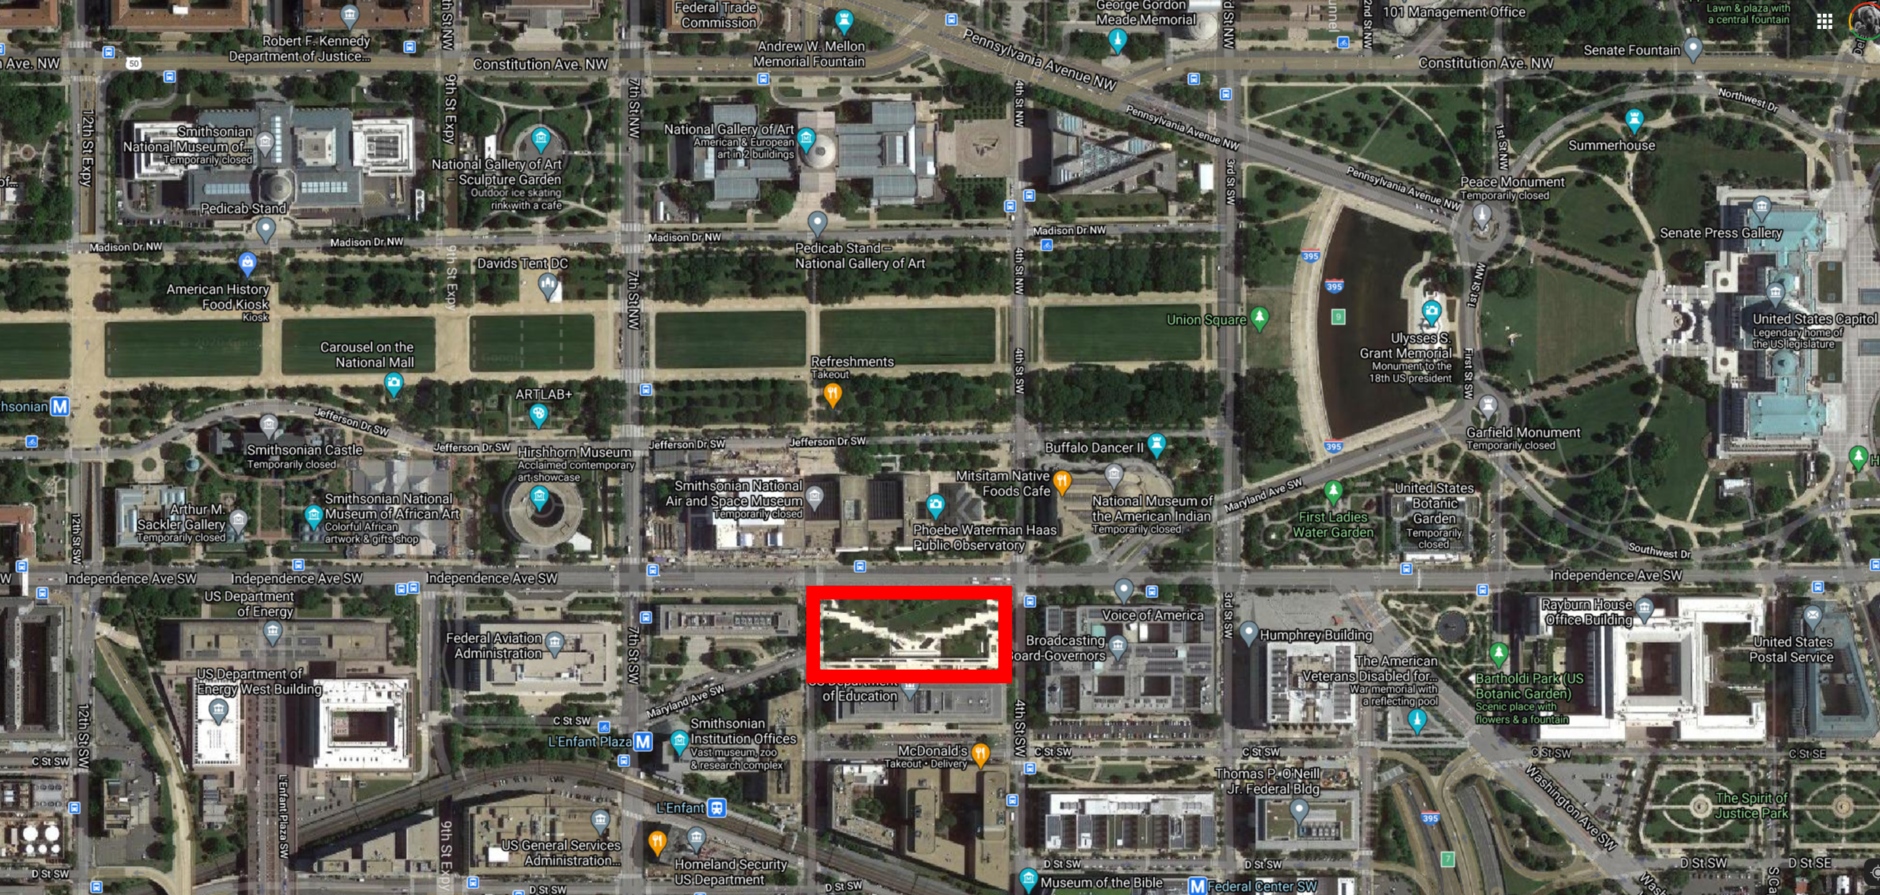 <p>The Dwight D. Eisenhower Memorial is located south of the Smithsonian National Air and Space Museum along Independence Avenue. (Courtesy Google Maps)</p>
